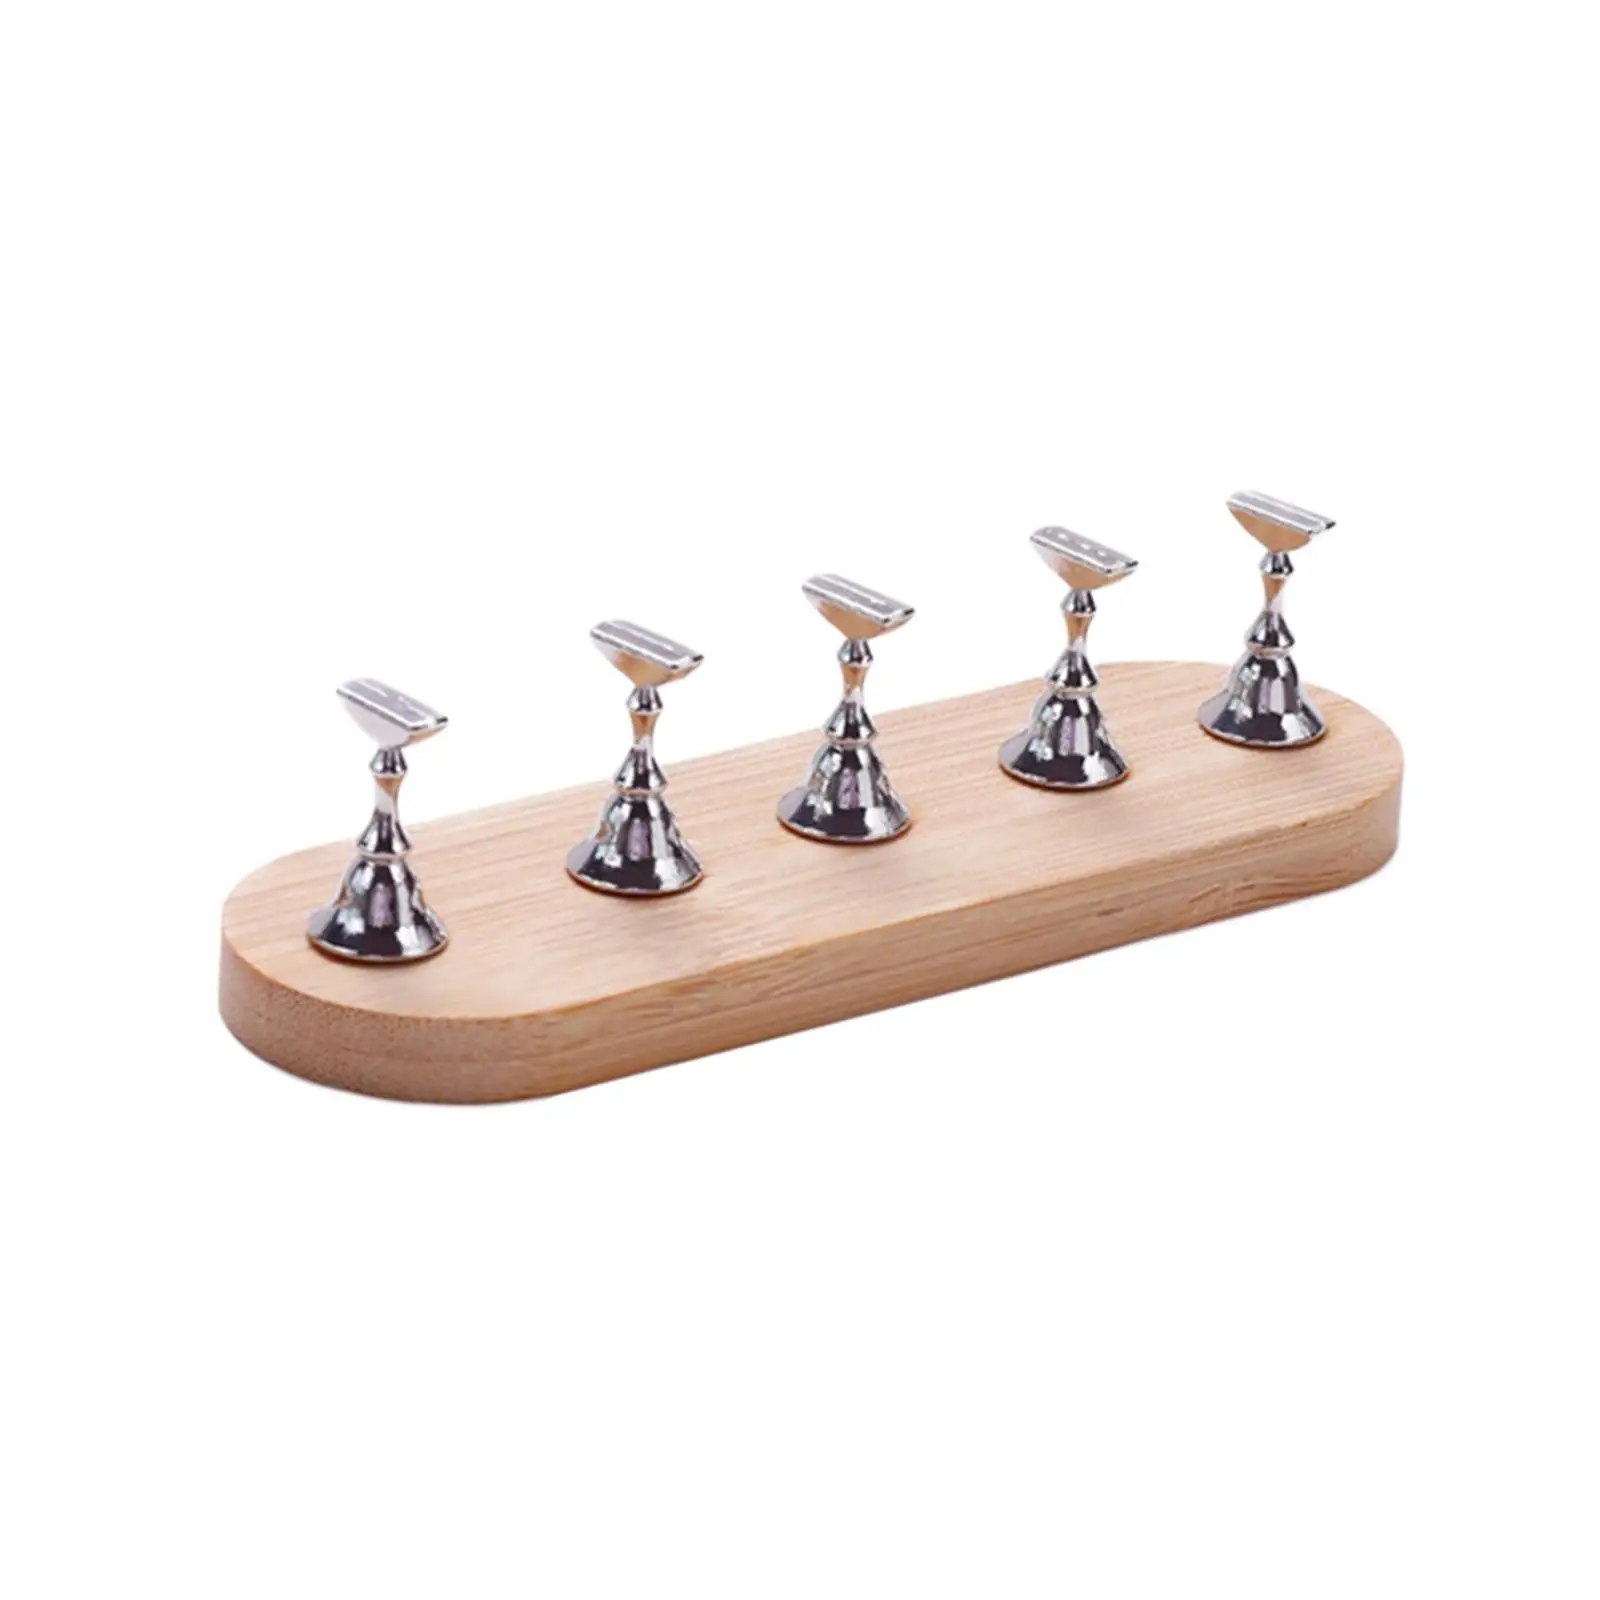 Nail Stand Nail Art Supplies Nail Showing Shelf Nail Practice Base for Home Salon DIY Makeup Training Practice Manicurists